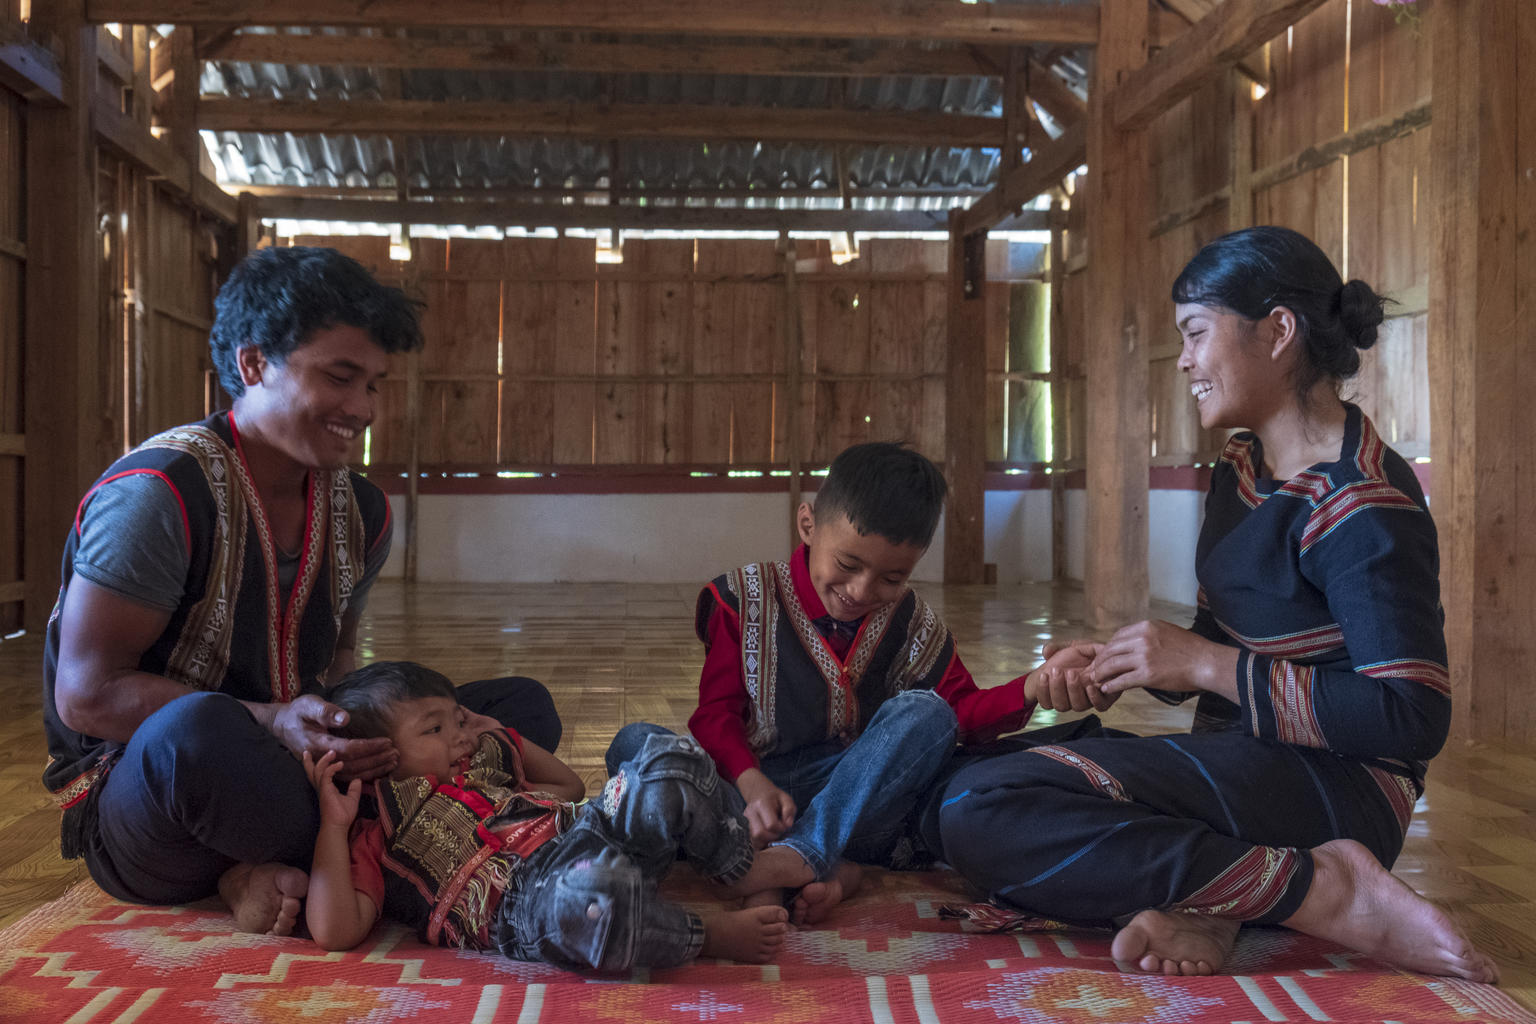 On 25 February 2020, Xu, 27, and his wife Del, 25, play with their two sons, Khon, 1, and Muih, 7, inside their home in Gia Lai, in the Central Highlands region of Viet Nam.